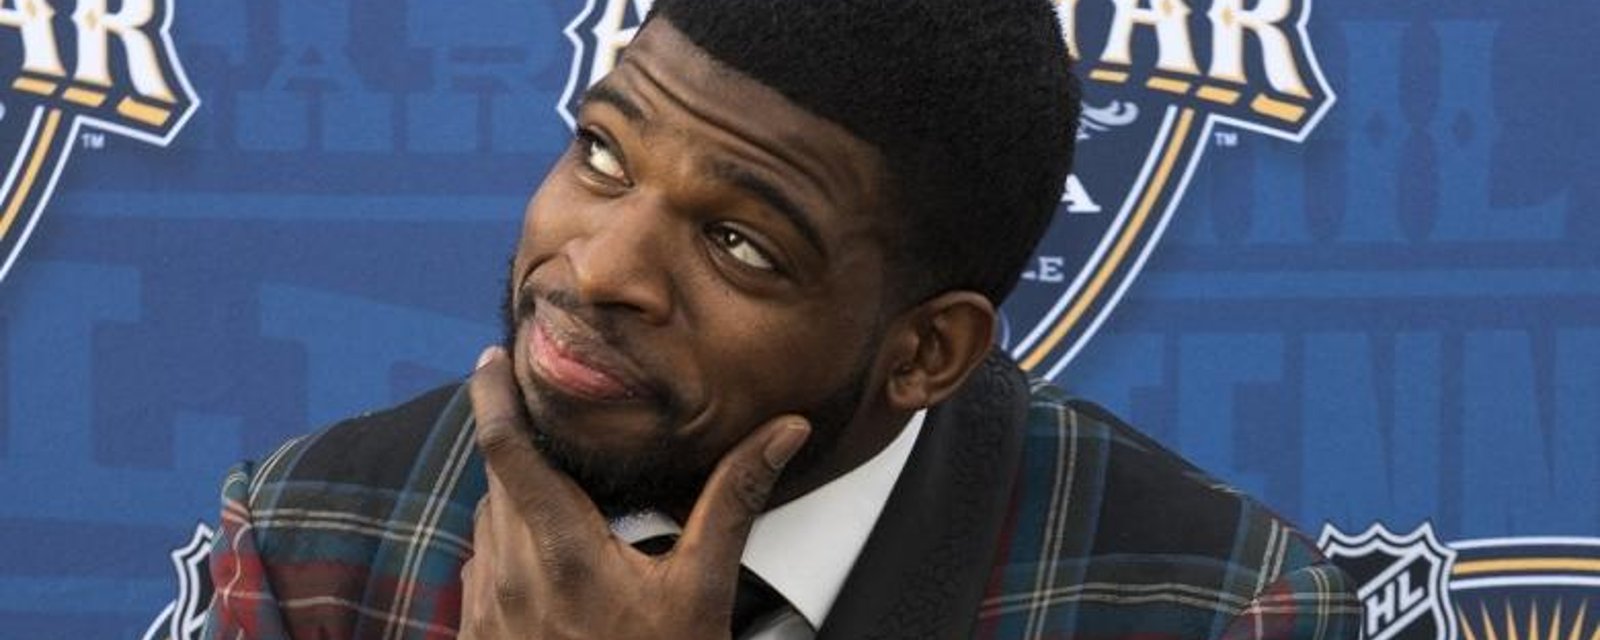 Former player reveals Montreal's asking price for P.K. Subban.